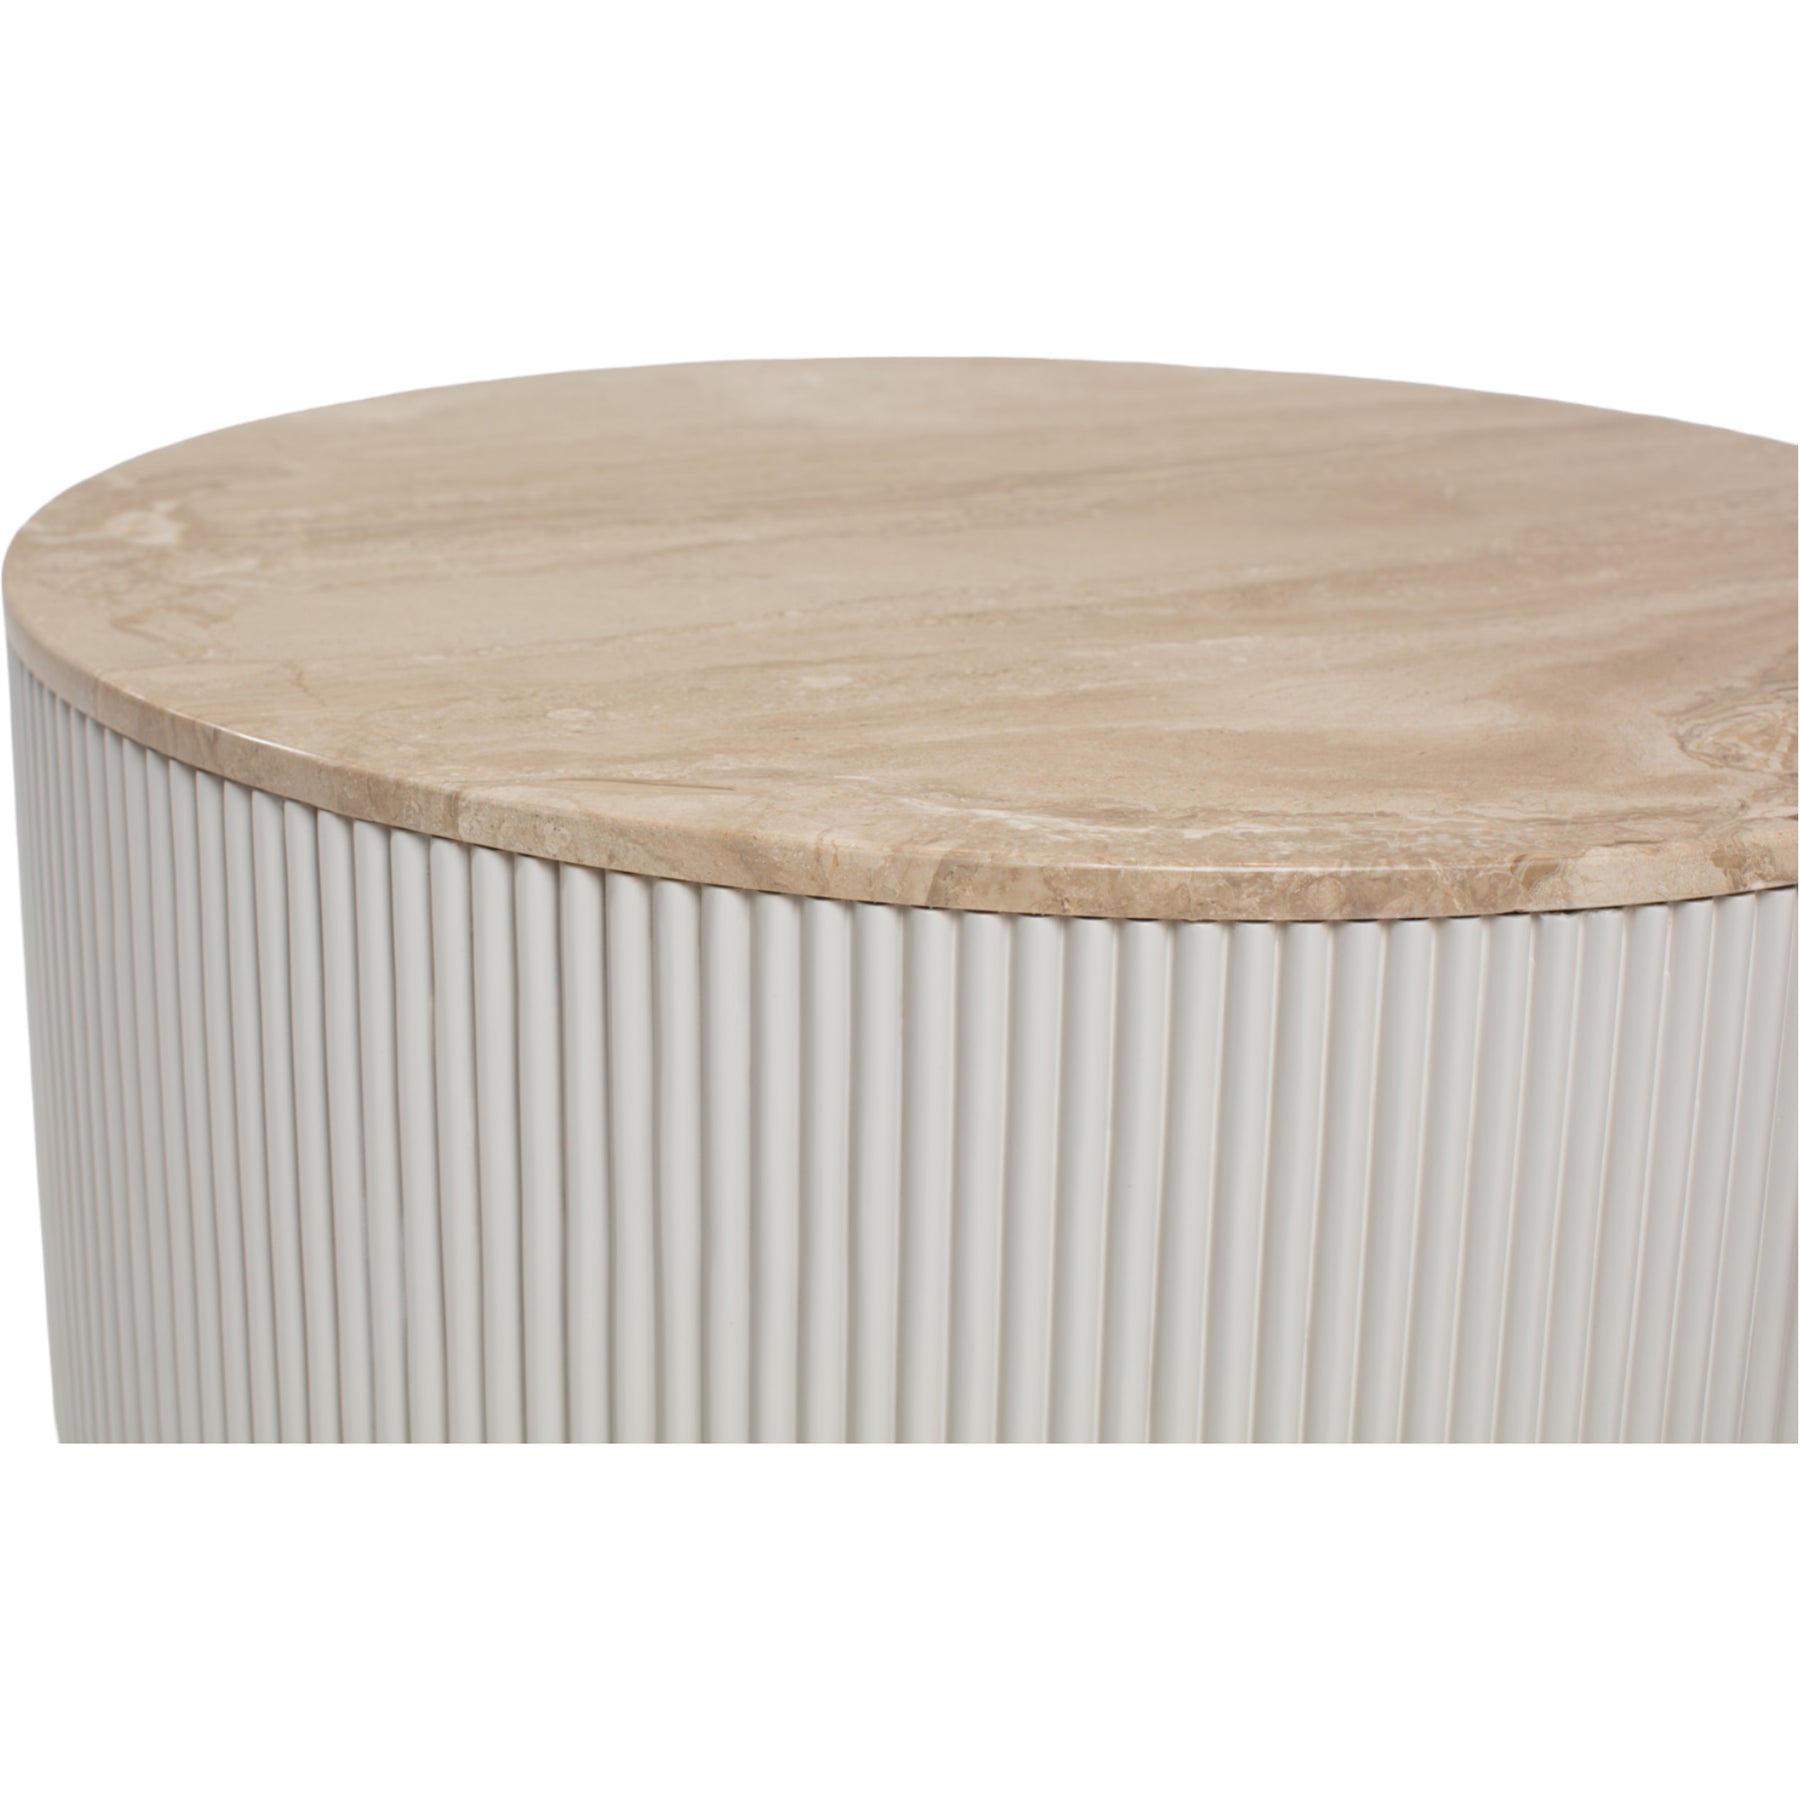 HAND MADE WHITE NORDIC DIANNA BEIGE MARBLE FLUTED COFFEE TABLE